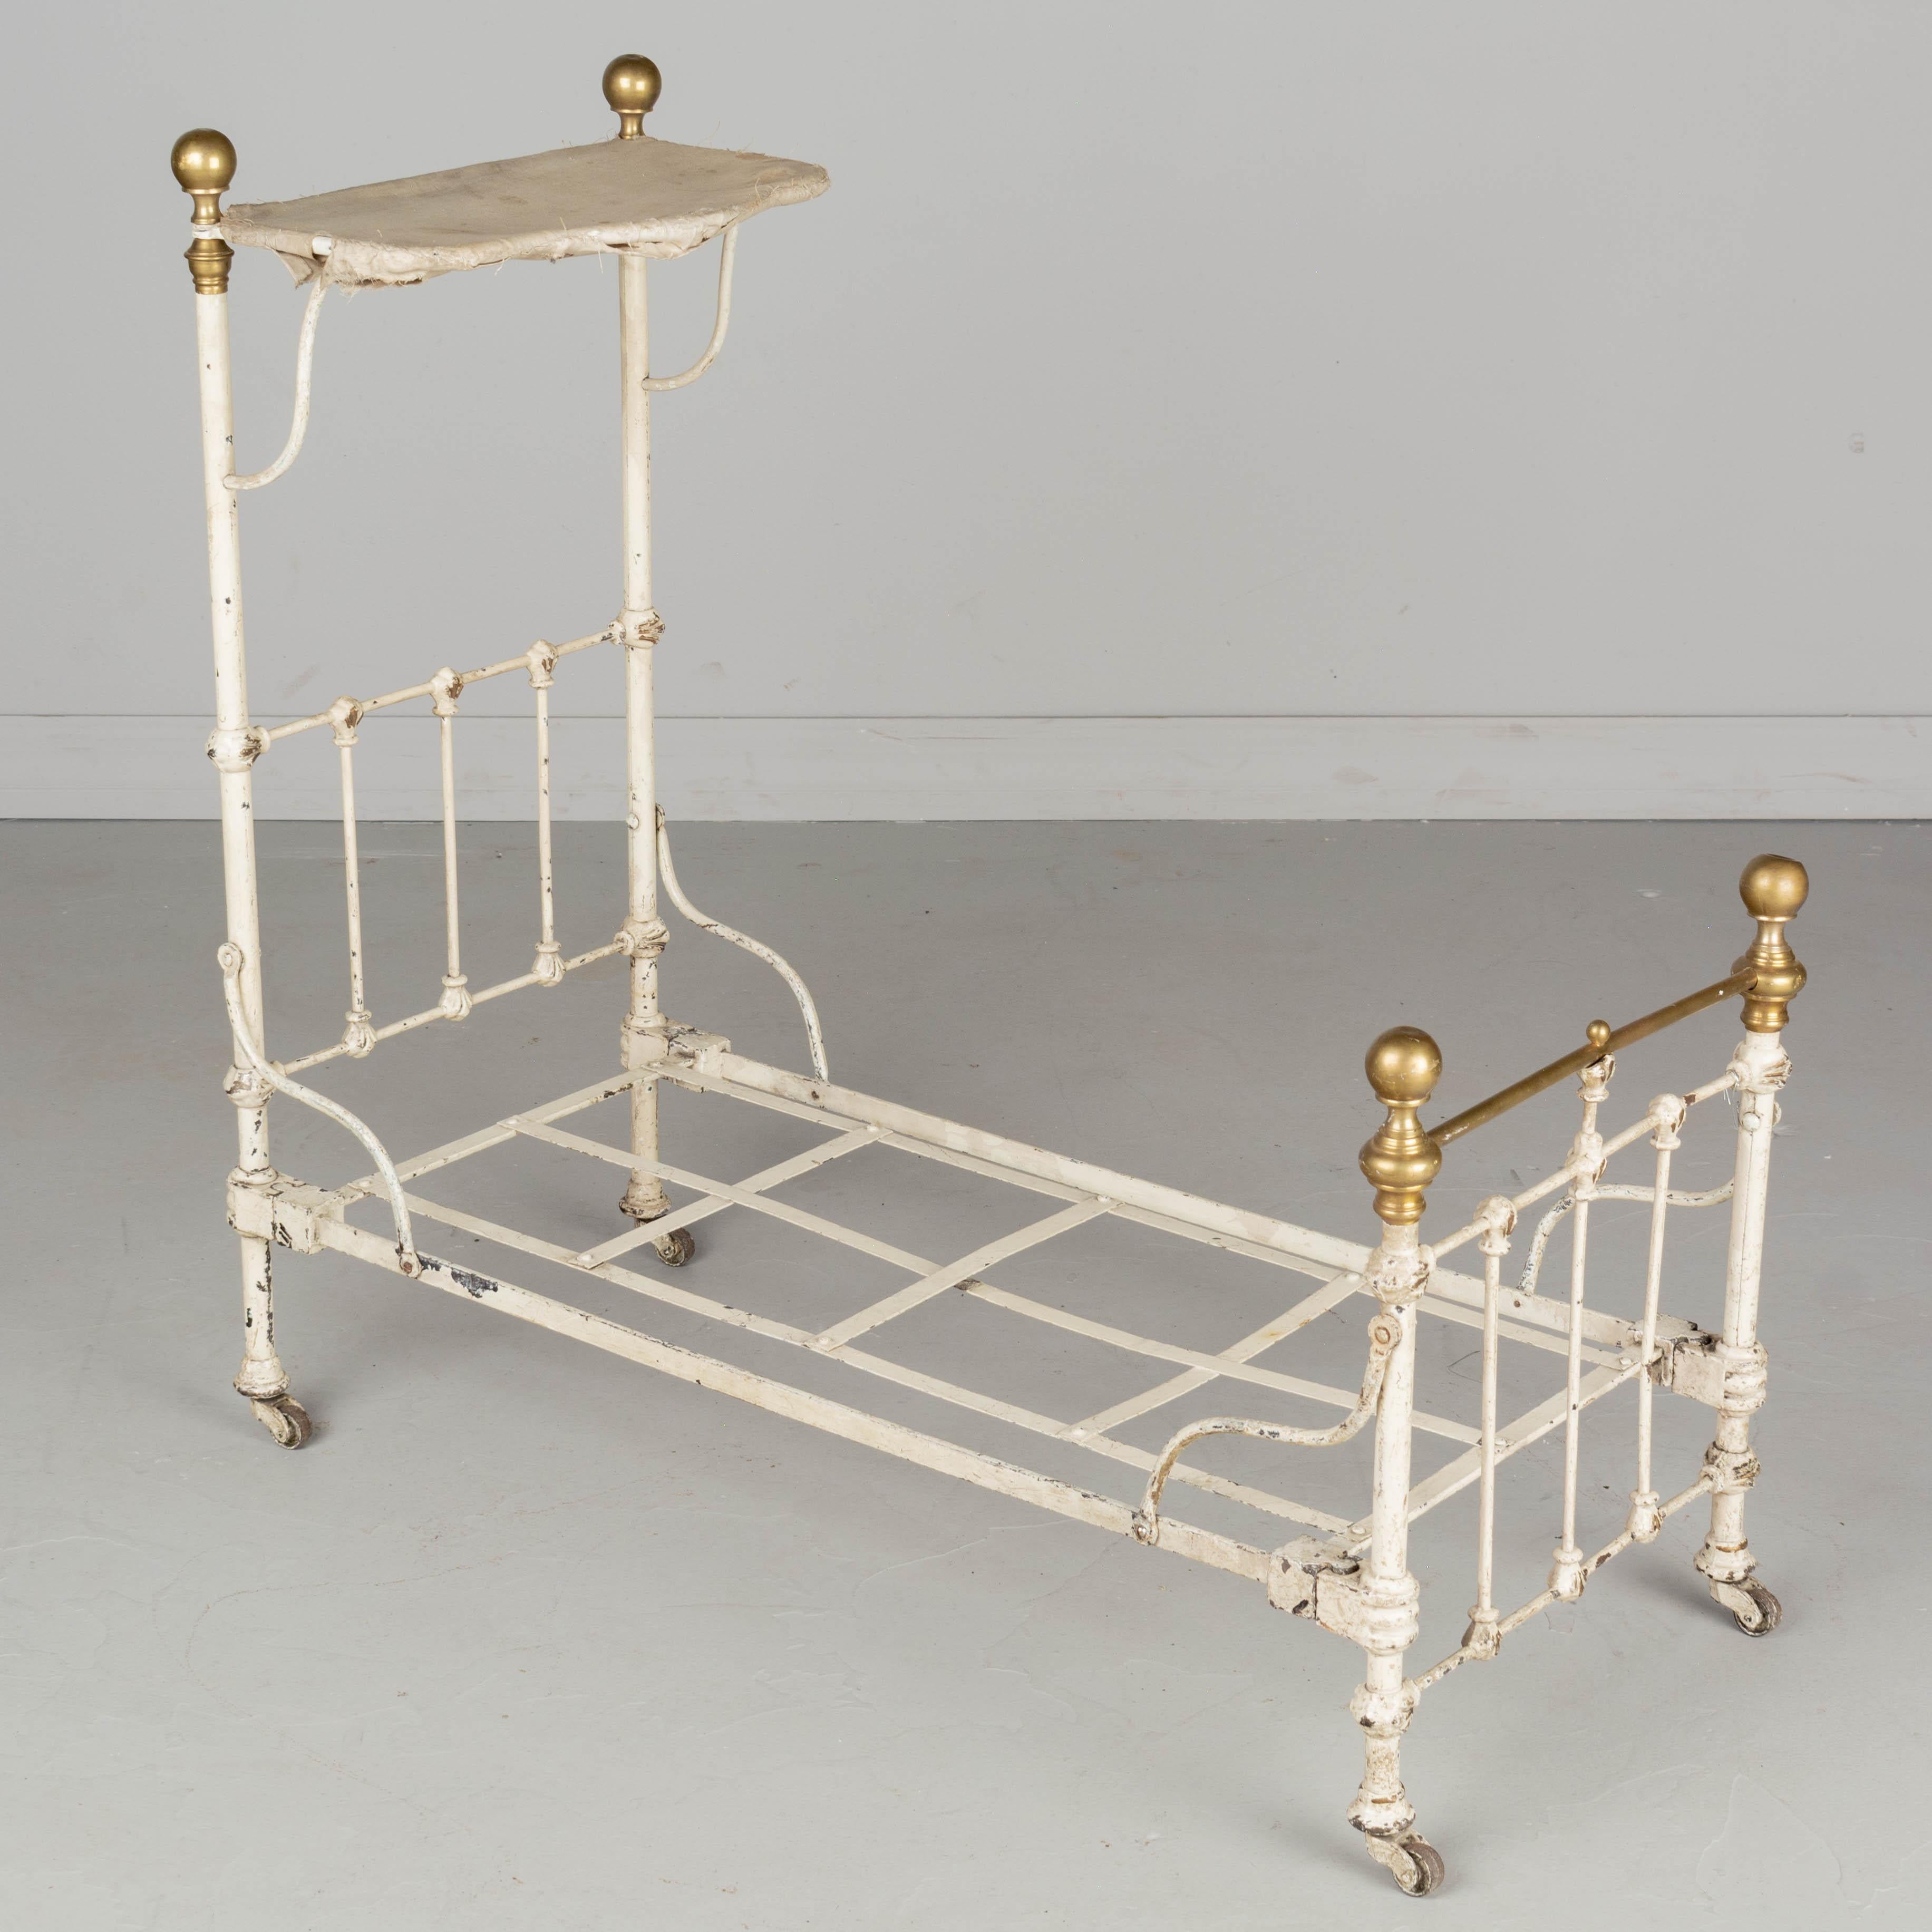 A French cast iron miniature sampler bed with white painted patina and brass finial decorative elements. Woven iron straps support a 13.5